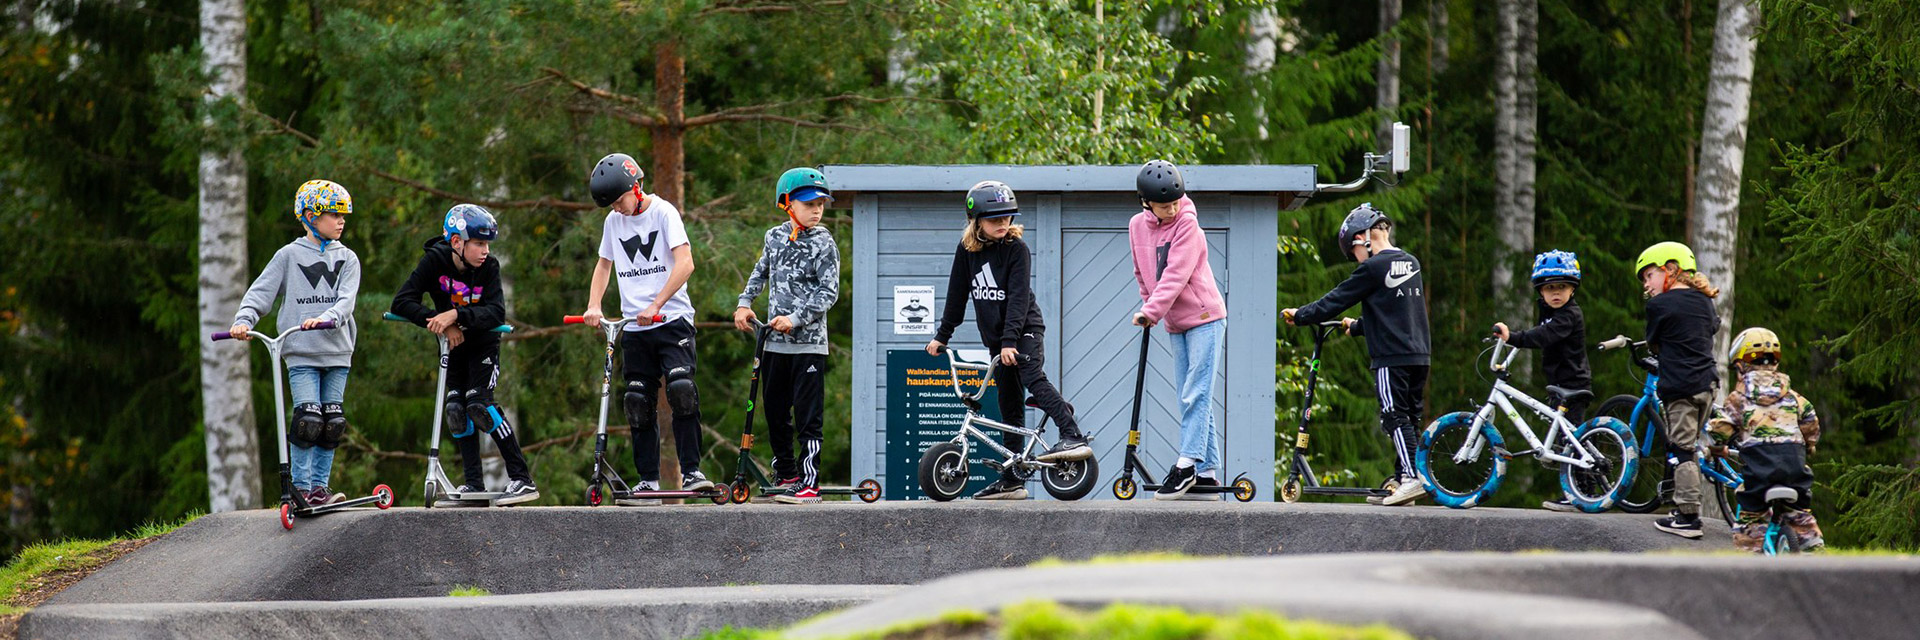 Kids on the pump track with their bikes and kick scooters.